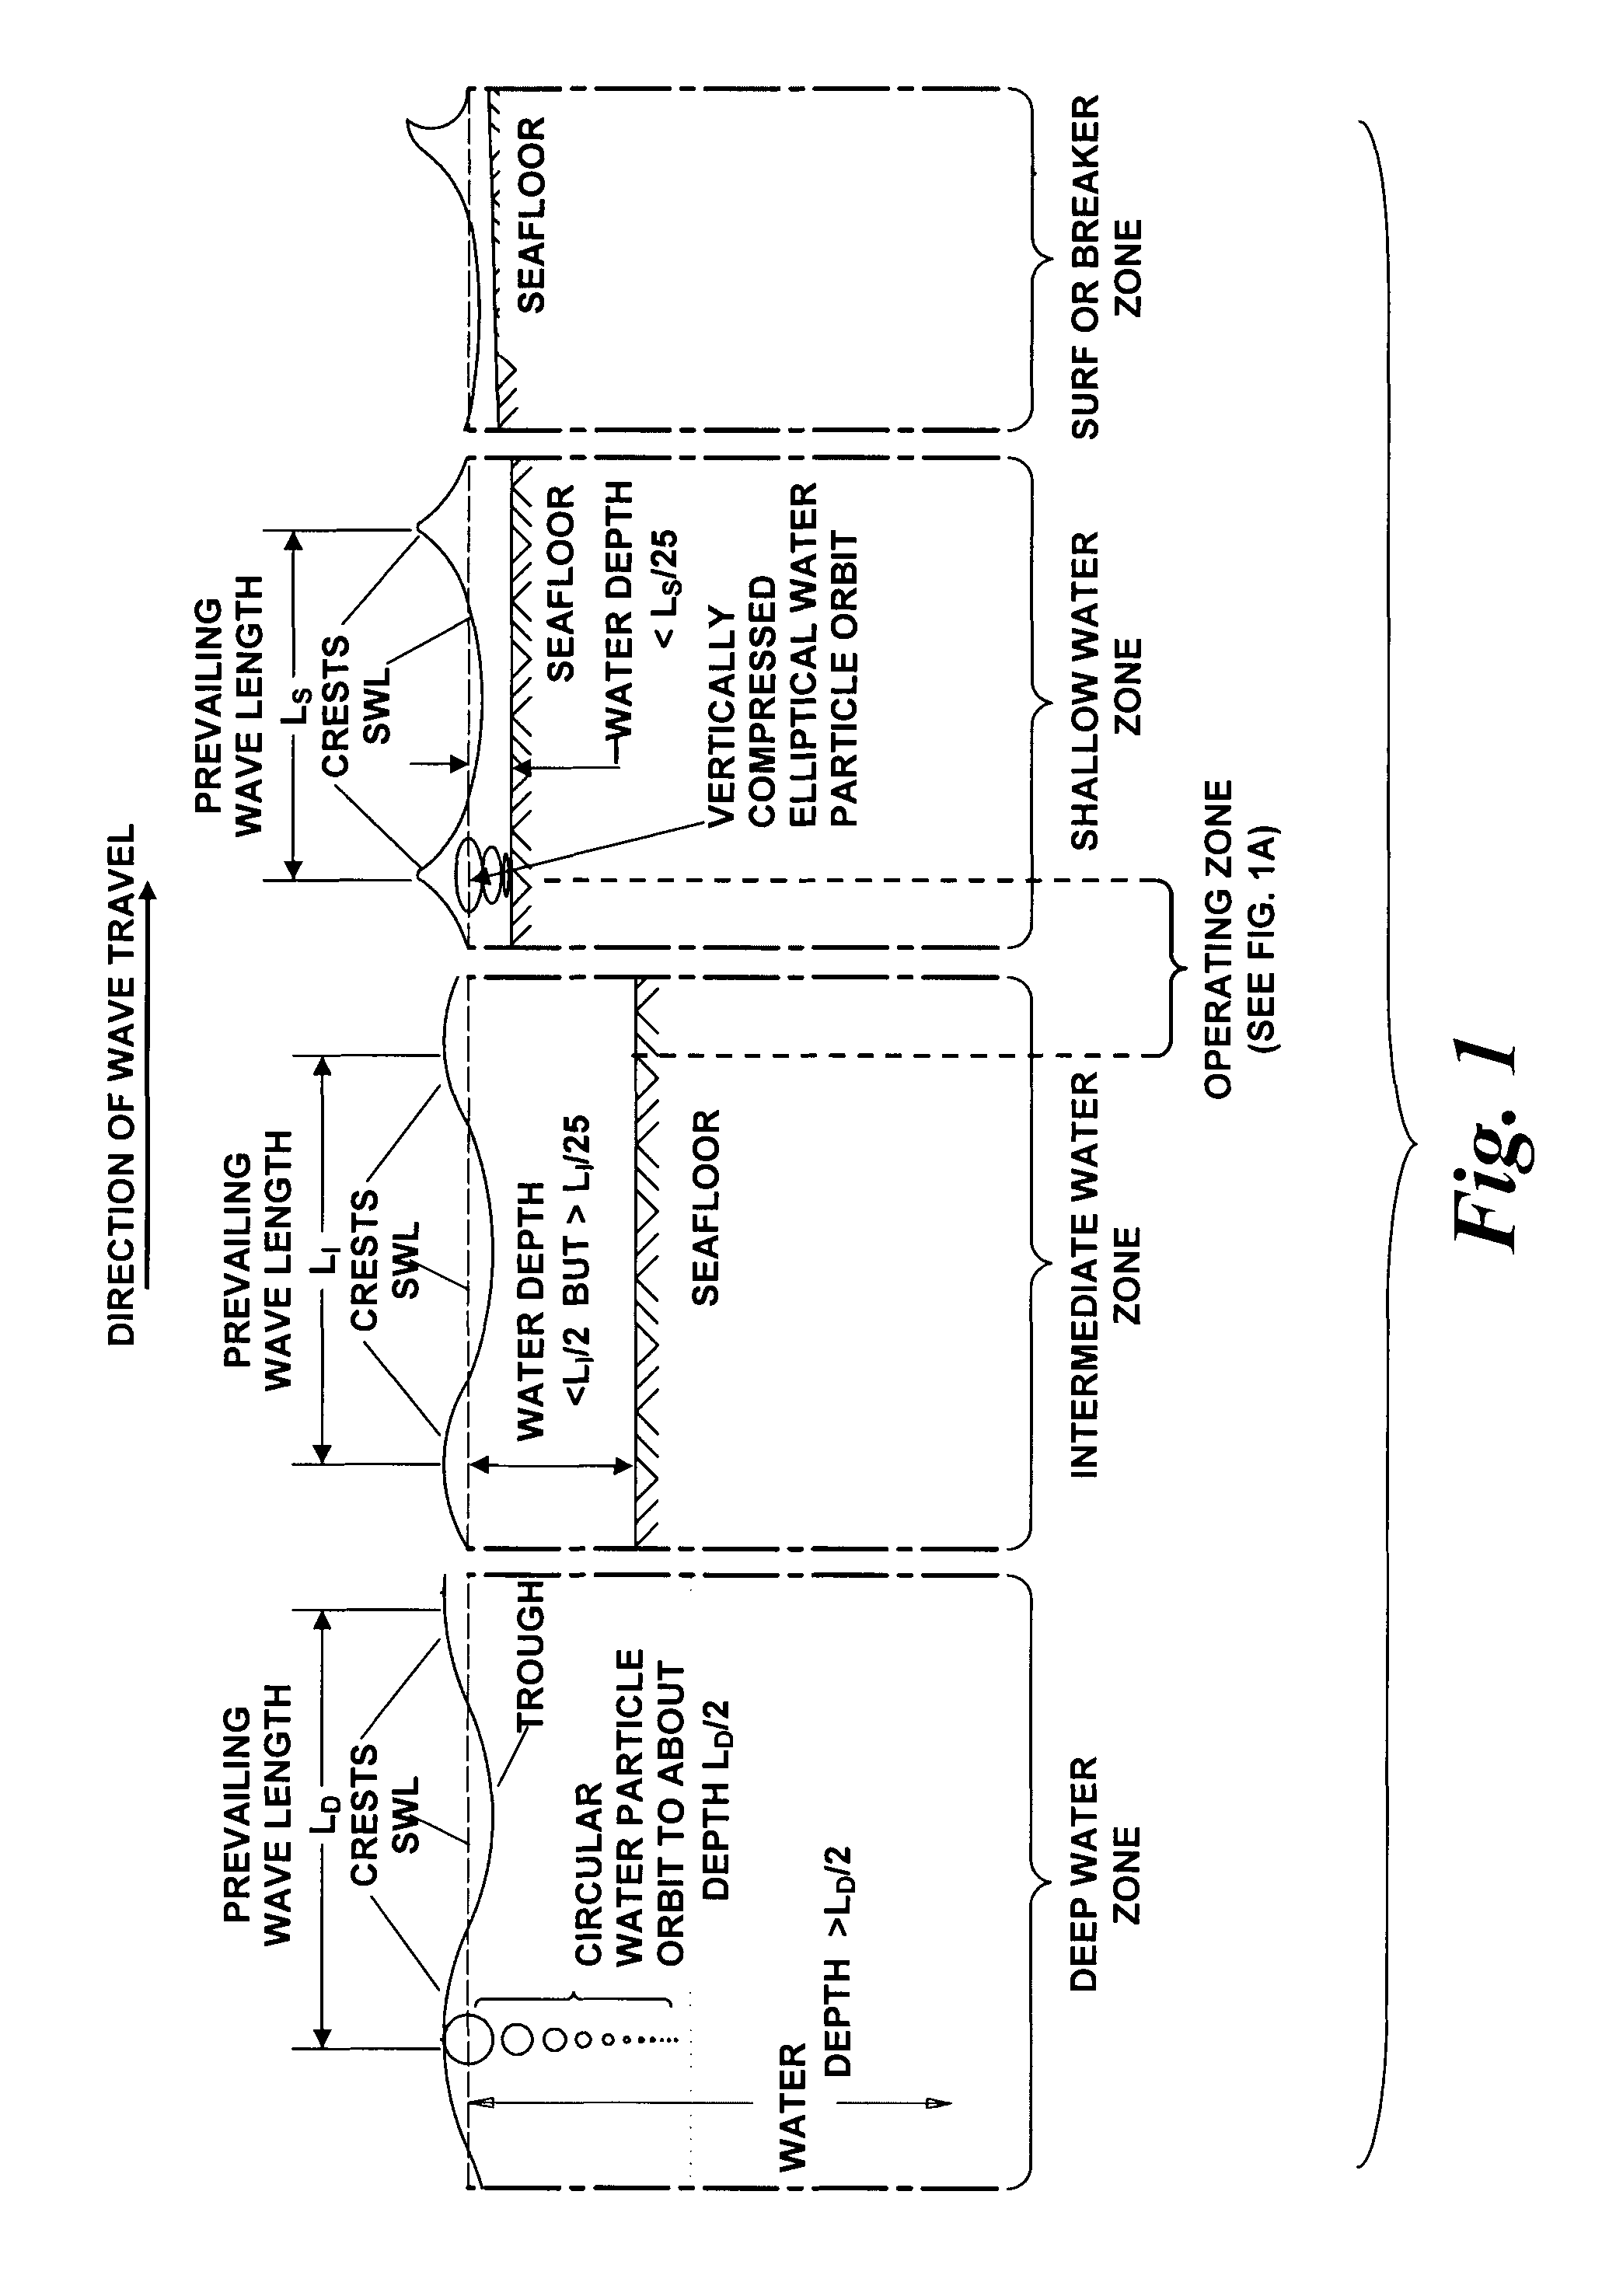 Ocean wave kinetic energy conversion method and system